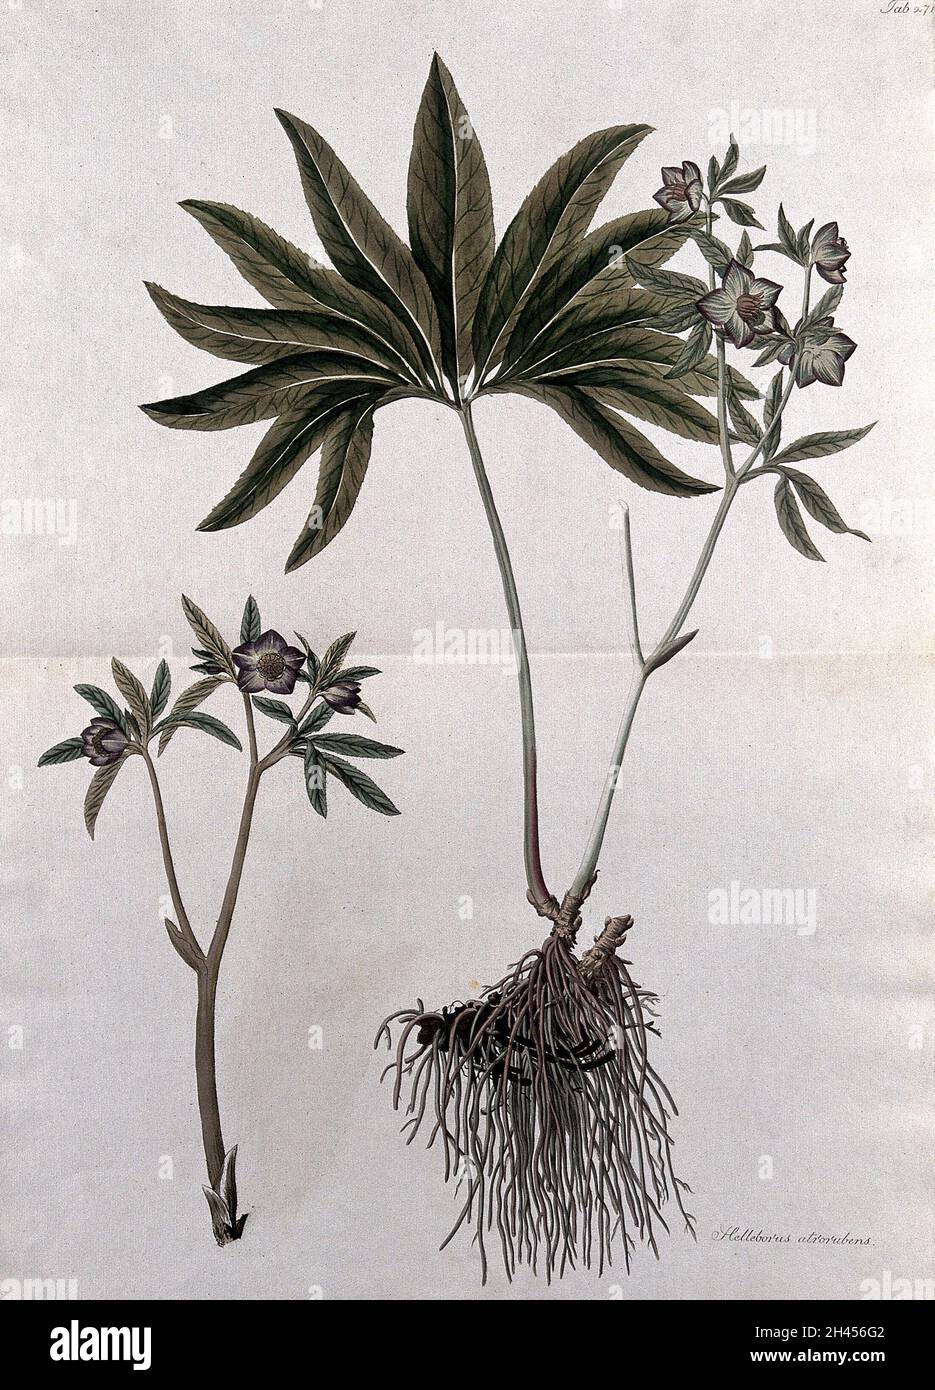 Hellebore (Helleborus atrorubens): fruiting stem with roots and separate flowering stem. Coloured etching after J. Schütz, c.1802. Stock Photo